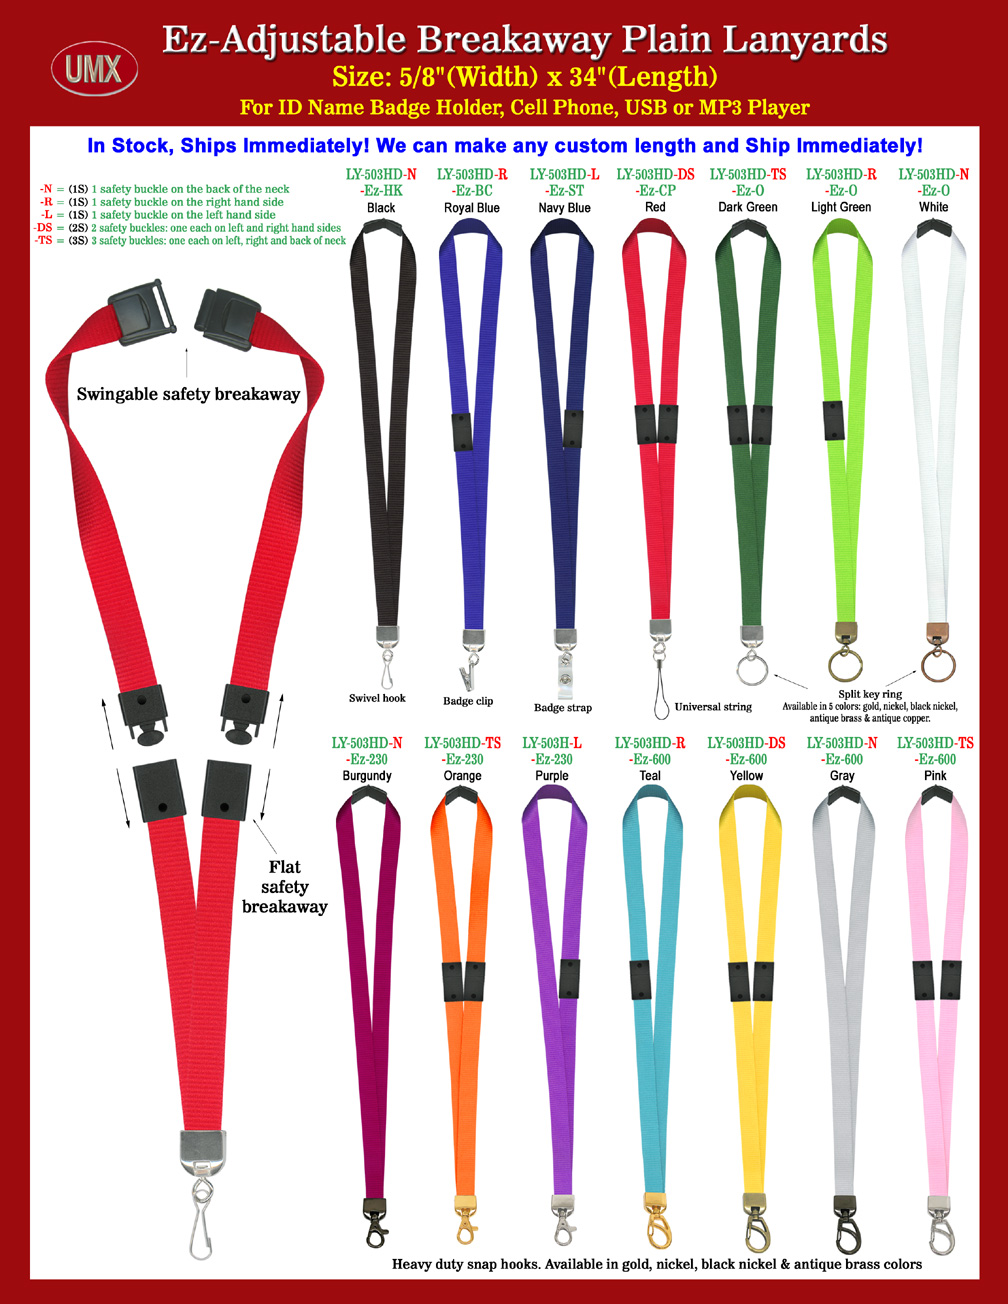 14 Colors of Multiple Safety Breakaway Plain ID Holder Neck Lanyards With Flexible Length.